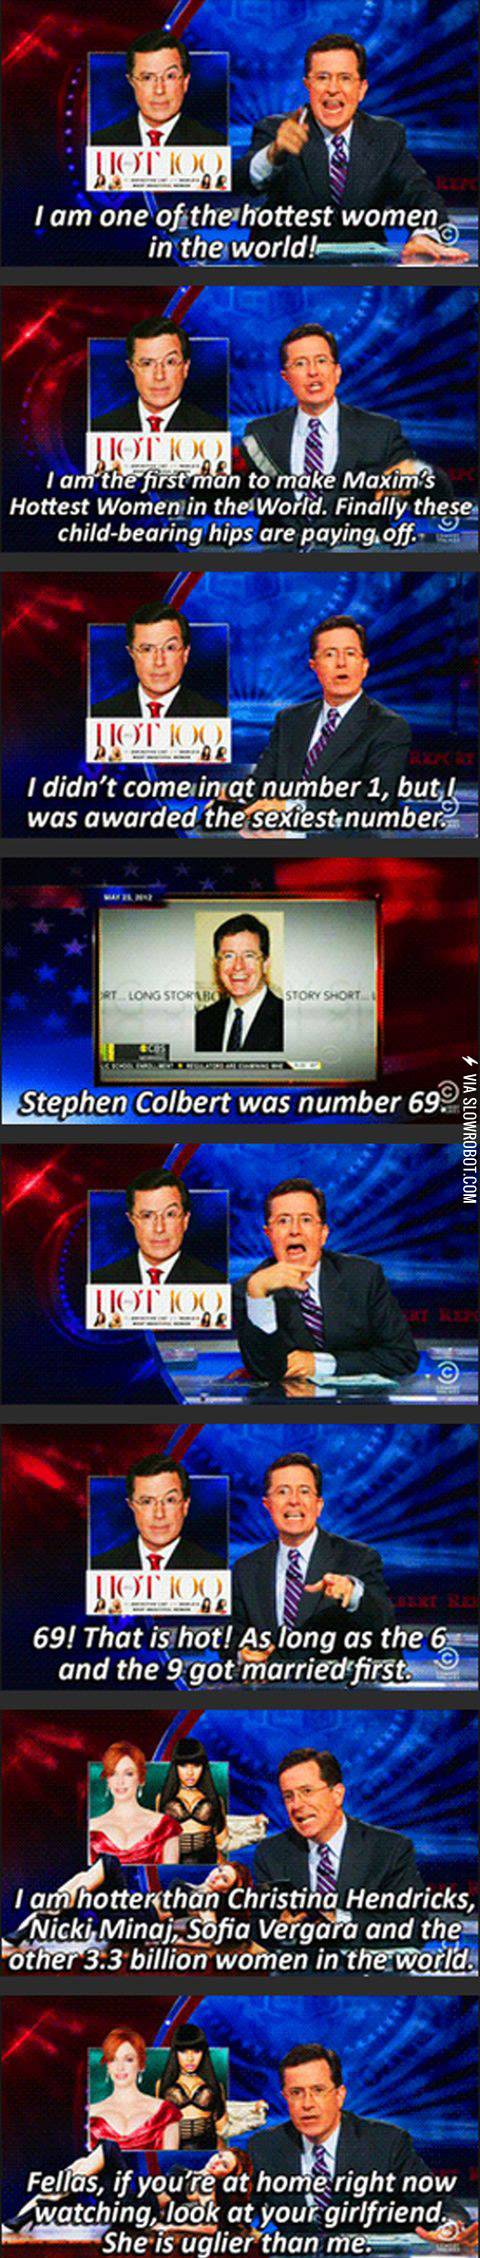 Stephen+Colbert+is+one+of+the+hottest+women+in+the+world%21